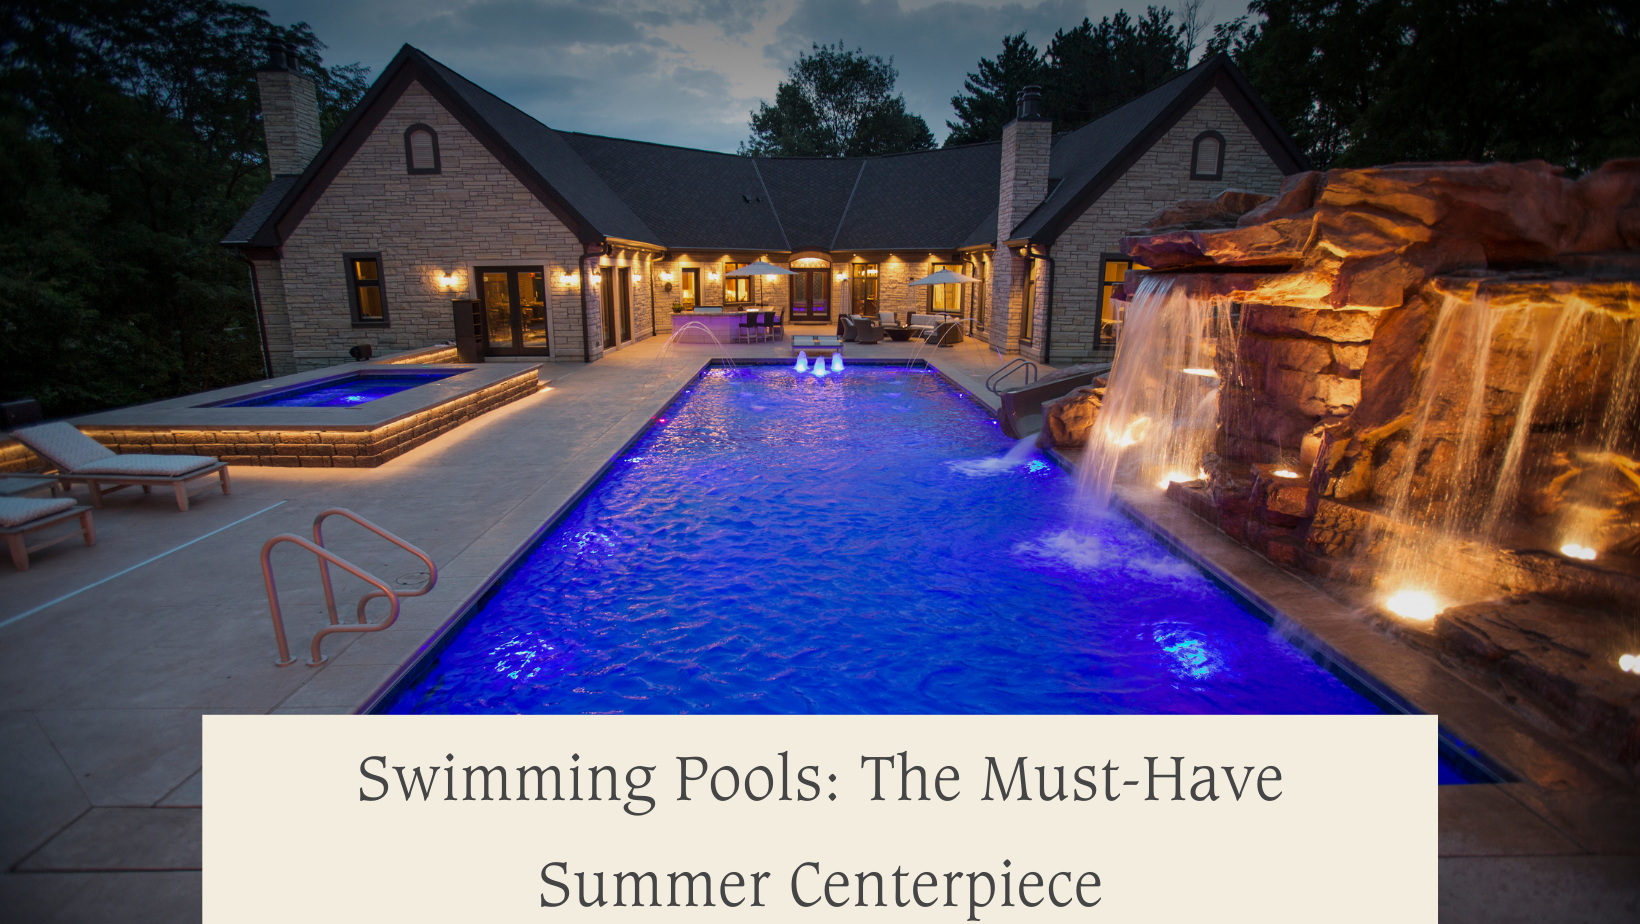 Swimming Pools: The Must-Have Summer Centerpiece